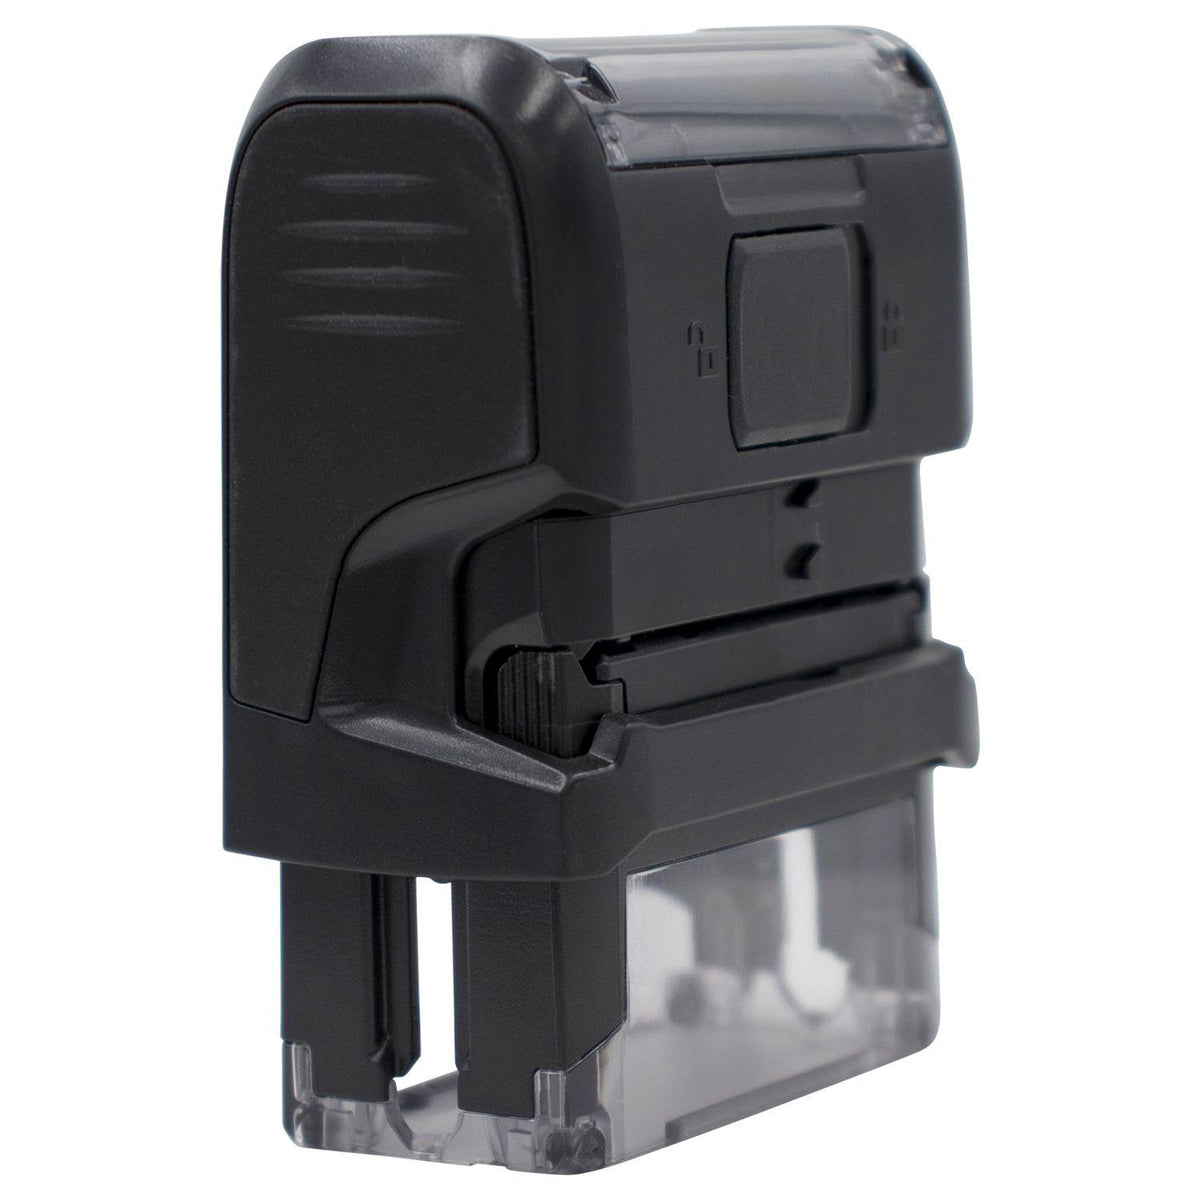 Self Inking Air Mail Stamp - Engineer Seal Stamps - Brand_Trodat, Impression Size_Small, Stamp Type_Self-Inking Stamp, Type of Use_Postal &amp; Mailing, Type of Use_Shipping &amp; Receiving